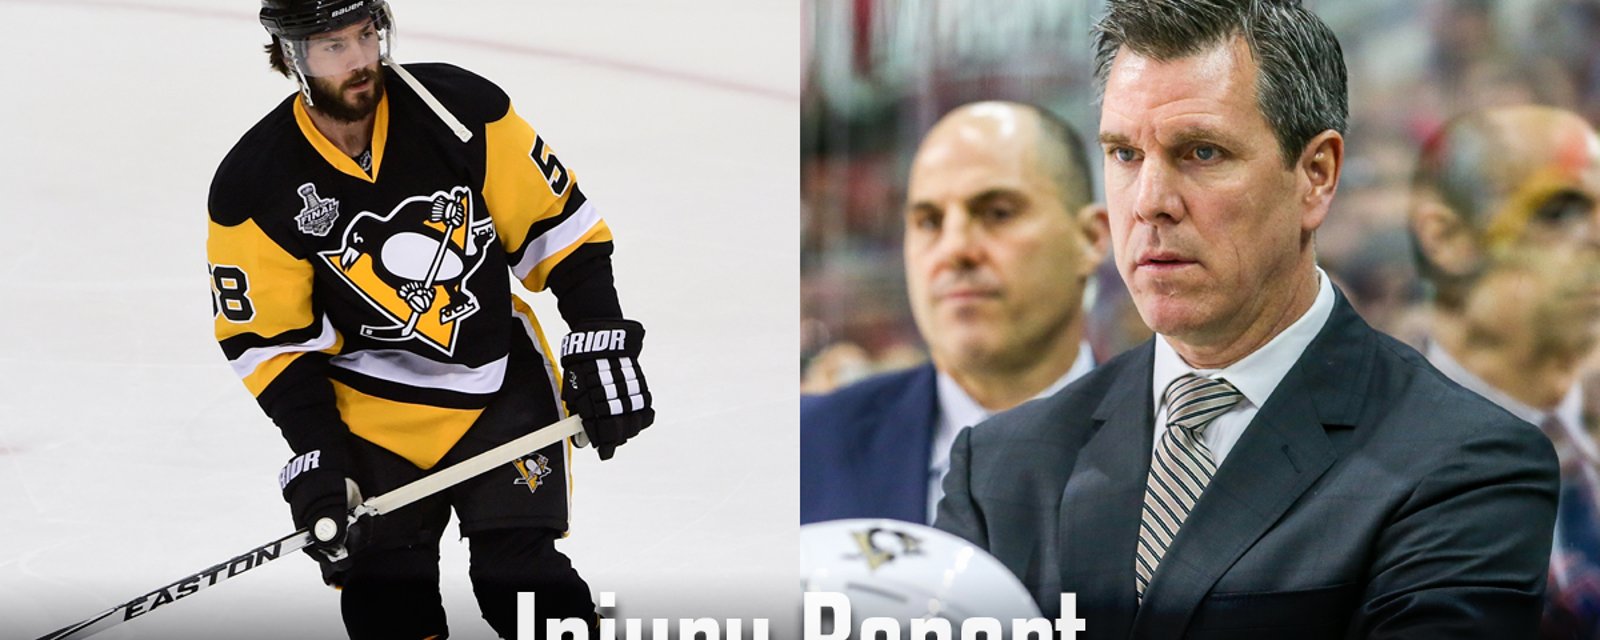 Injury Report: The Pittsburgh Penguins announced a terrible news today.